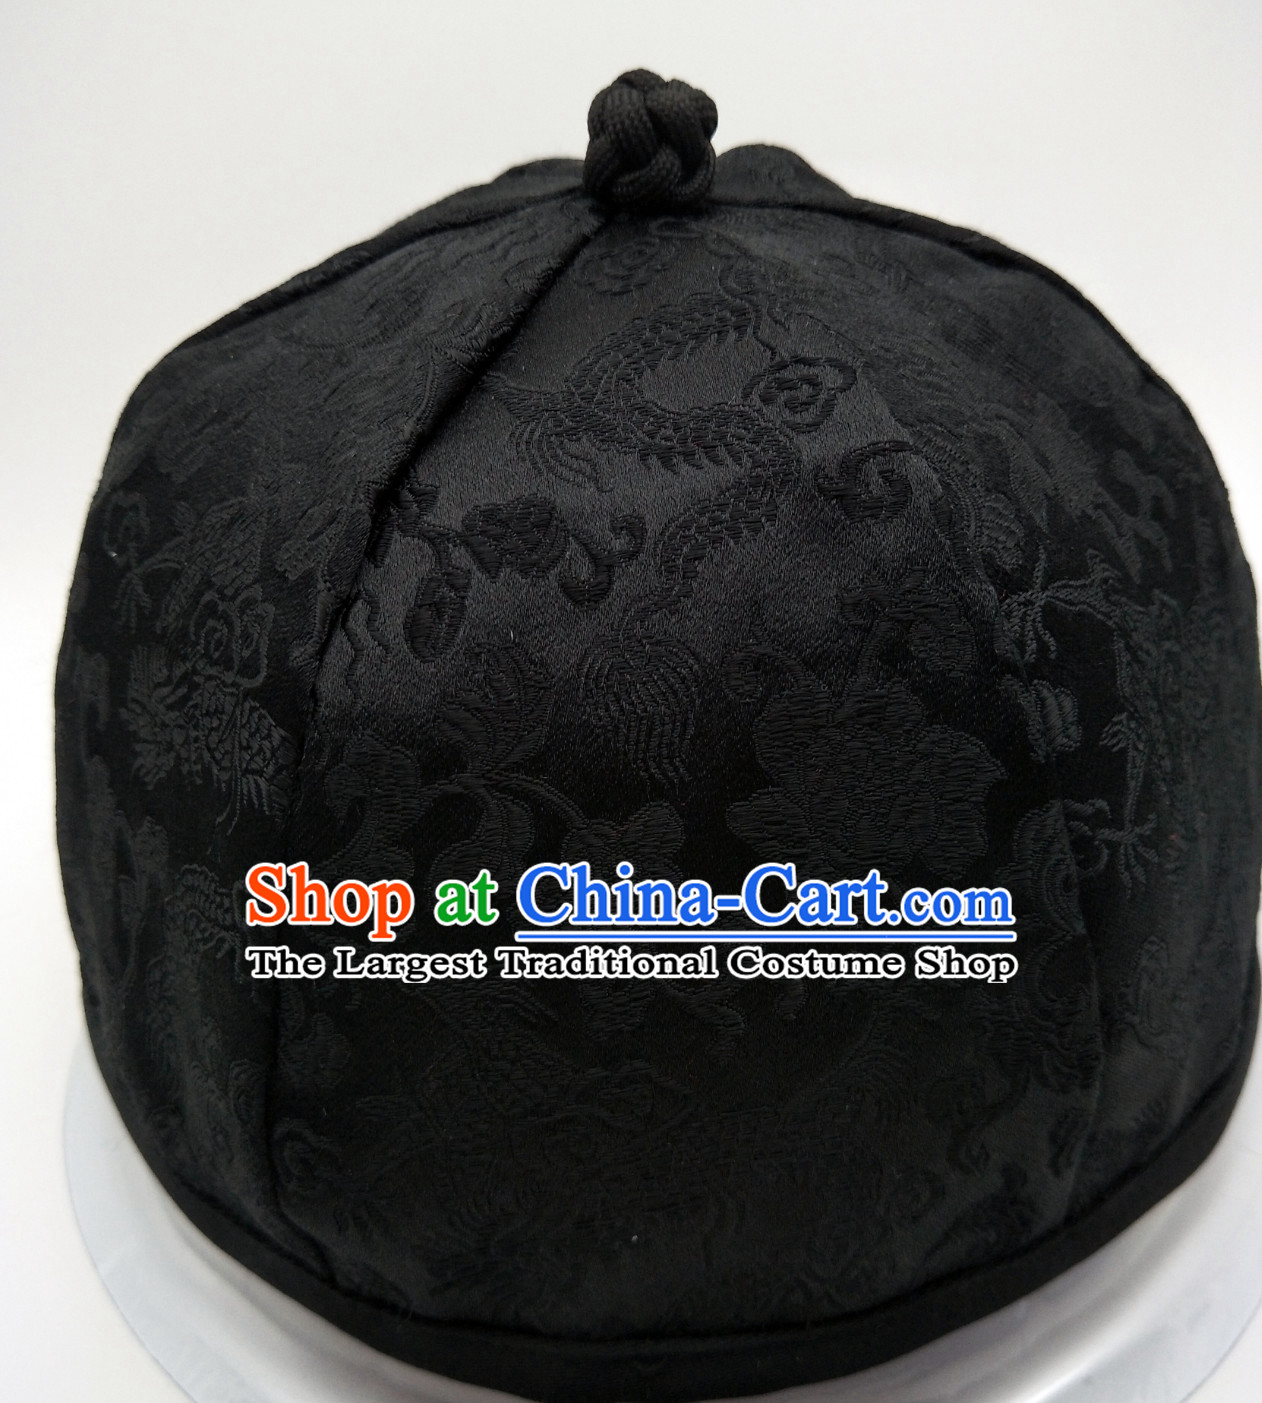 Chinese Ancient Style Handmade Qing Dynasty Black Hat for Men